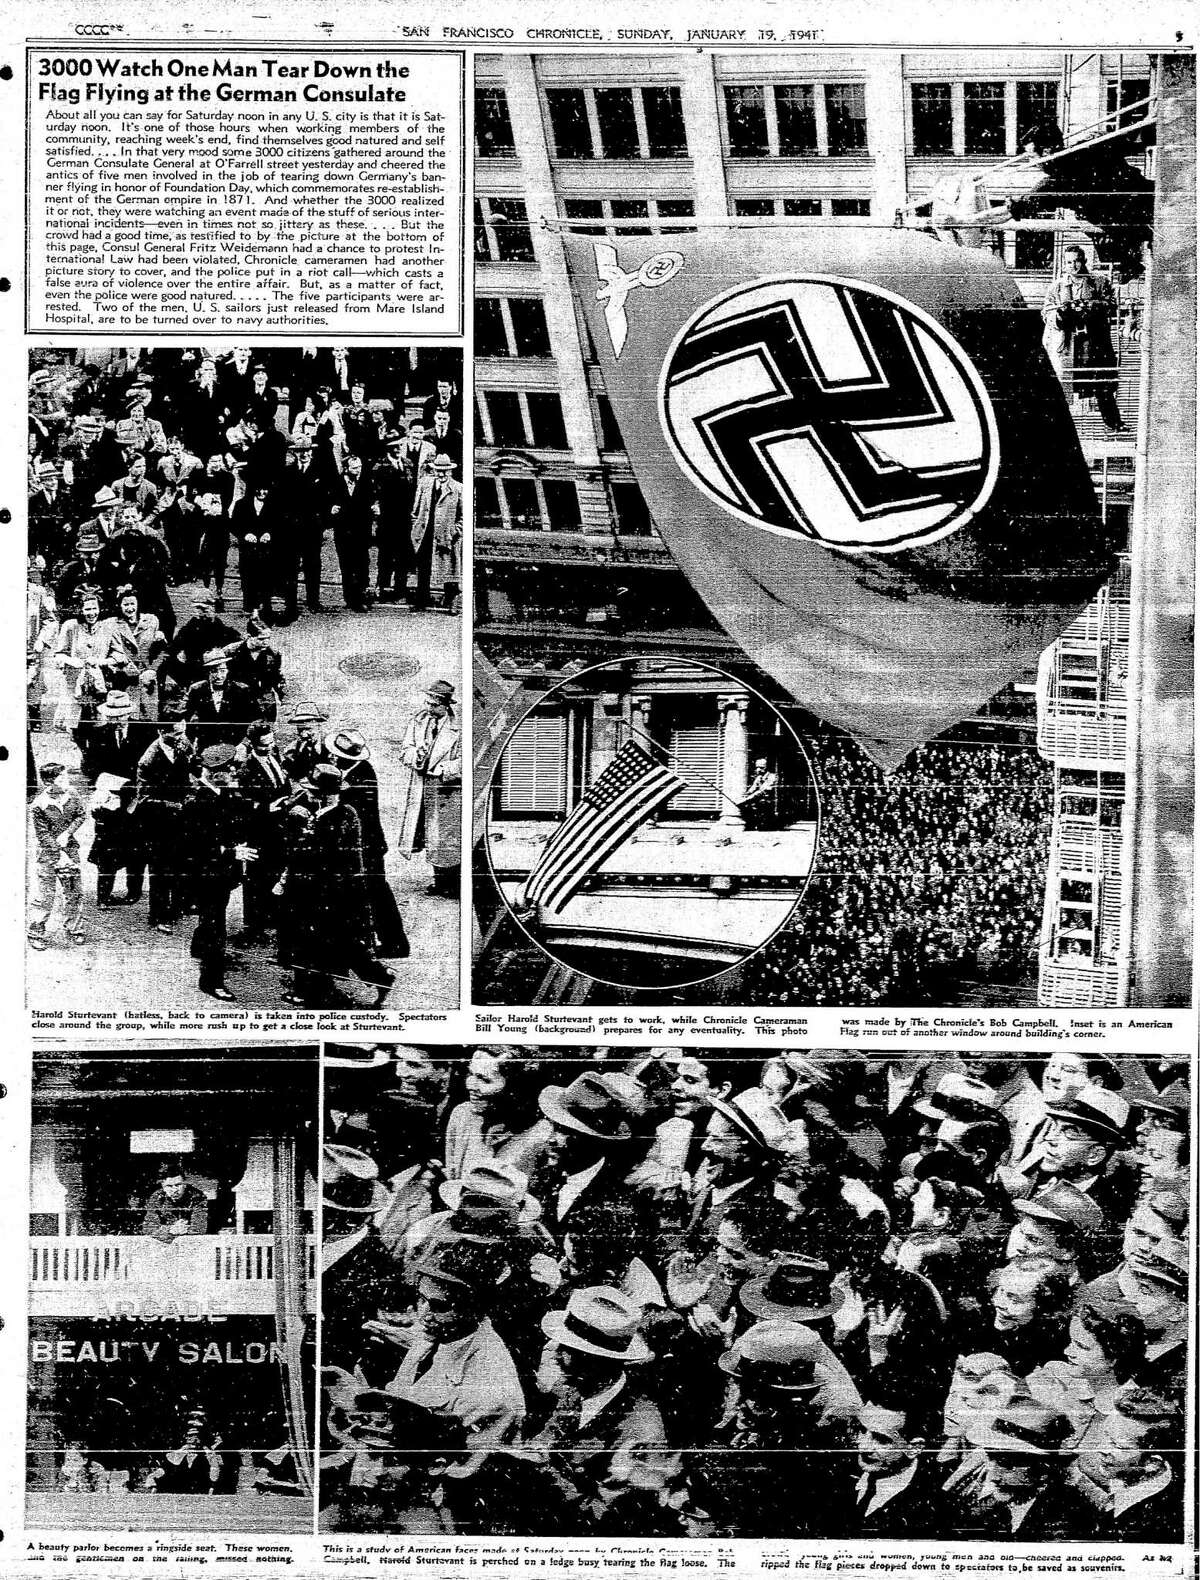 A page full of photos showed the crowd of 3,000 which would gather and cheer as Sturtevant made sure the Swastika flag hanging off the O'Farrell St. building came down, January 18, 1941